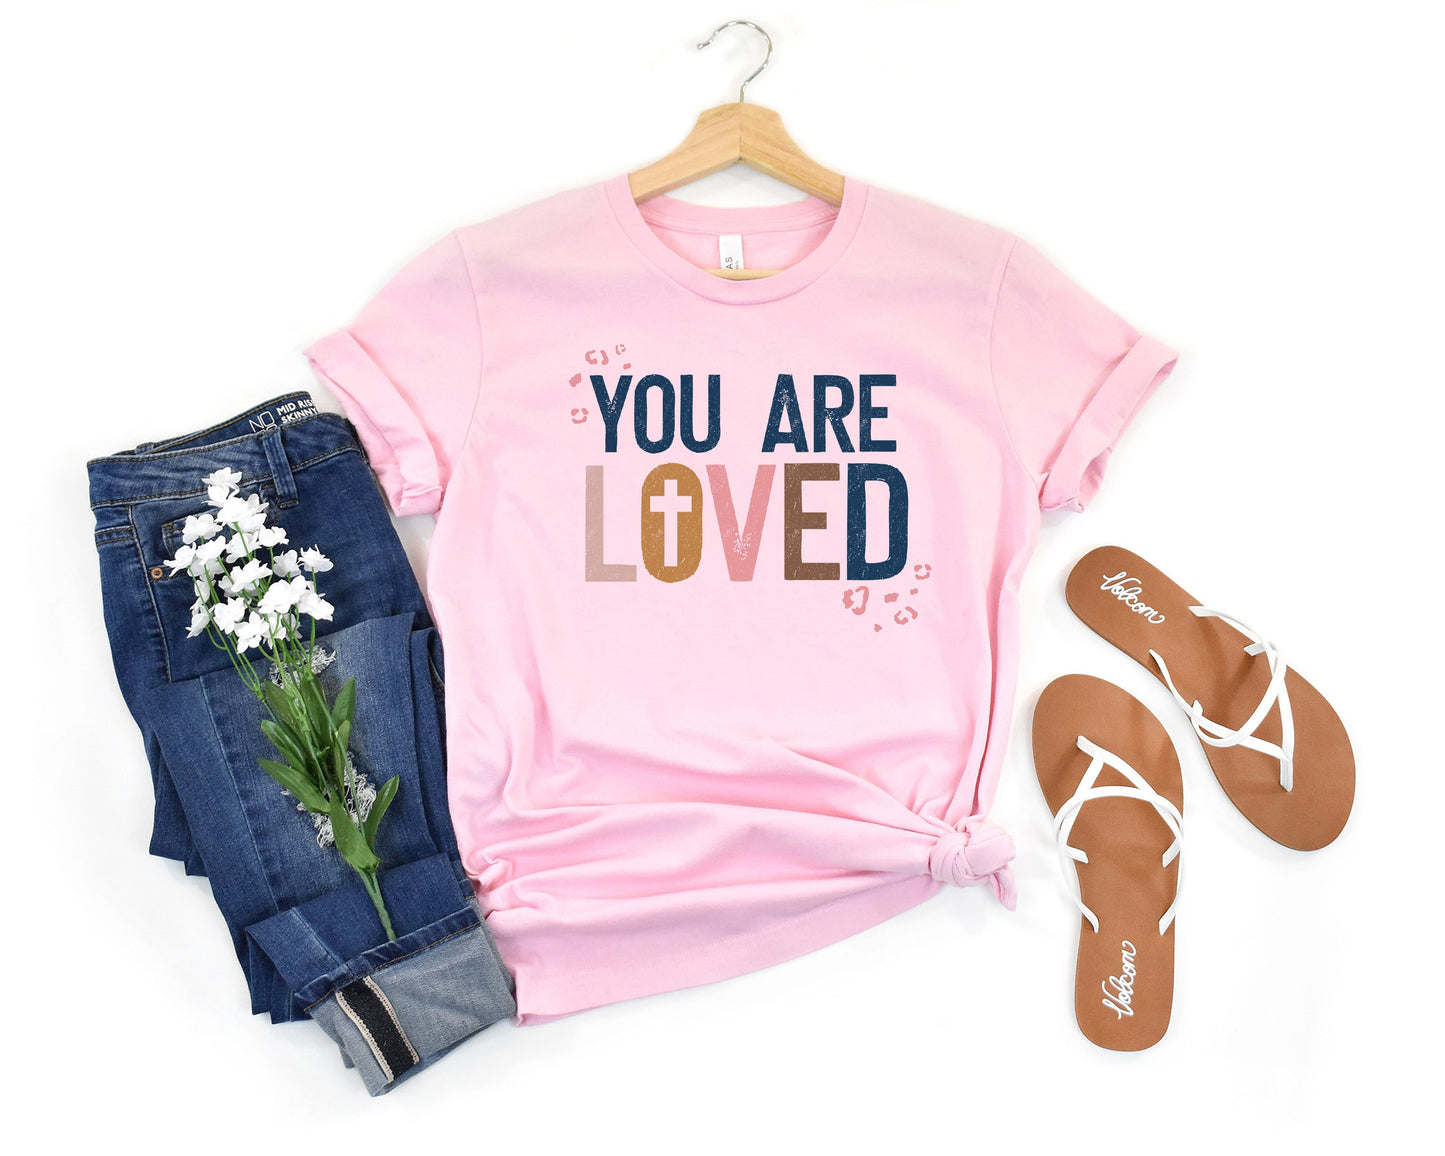 You Are Loved Adult Shirt- Inspirational 843